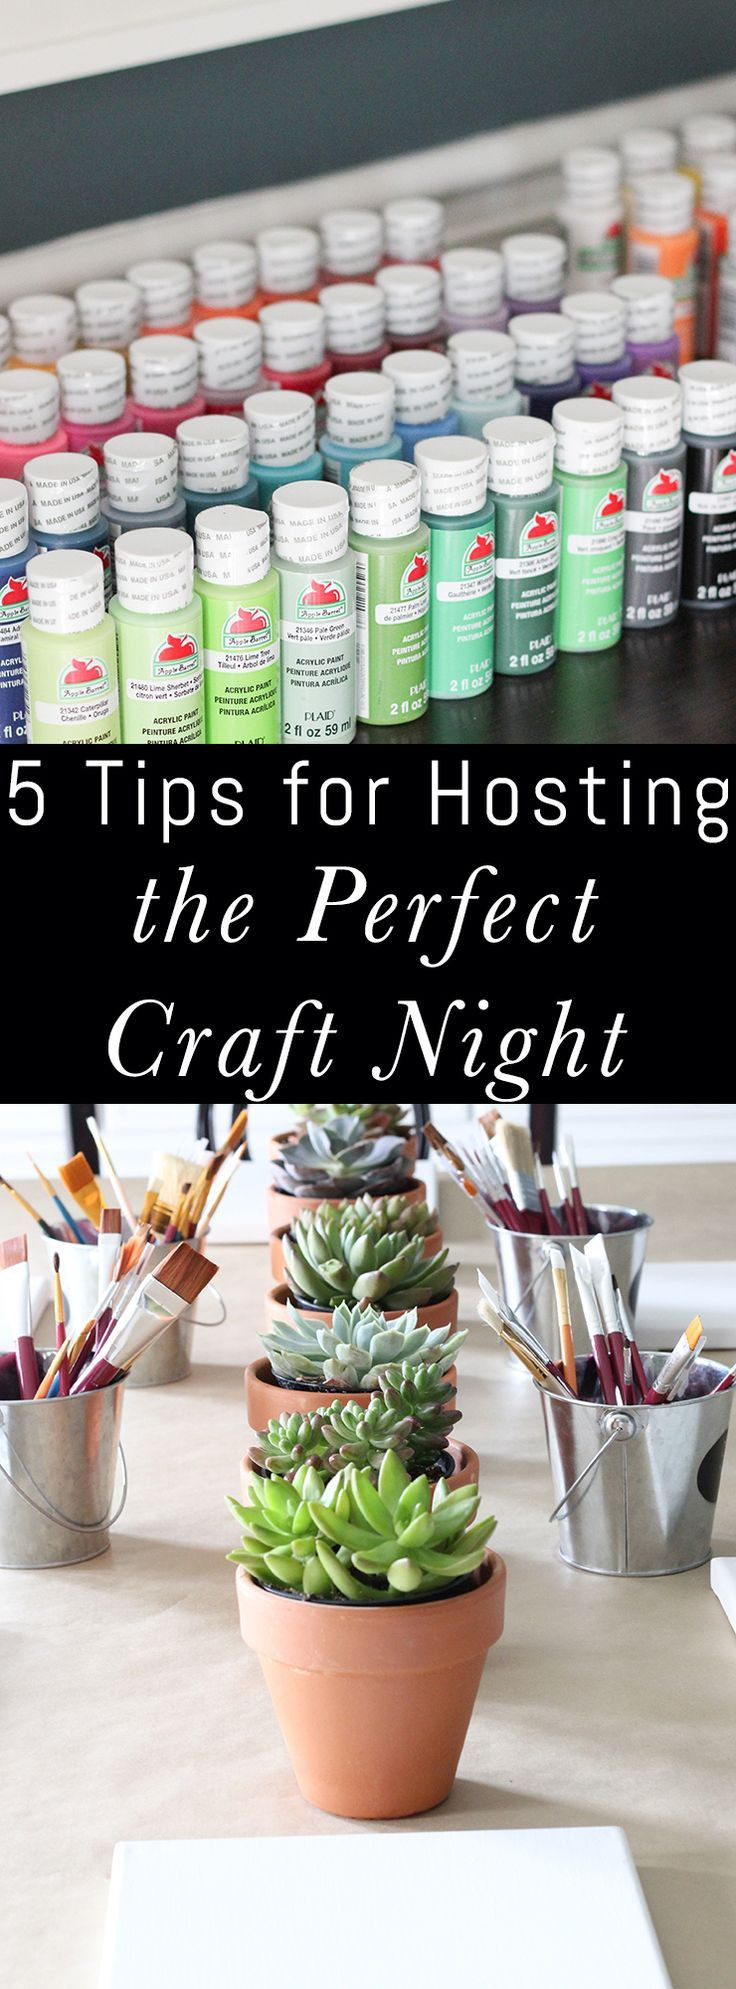 Craft Club Ideas For Adults
 5 Tips for Hosting the Perfect Craft Night